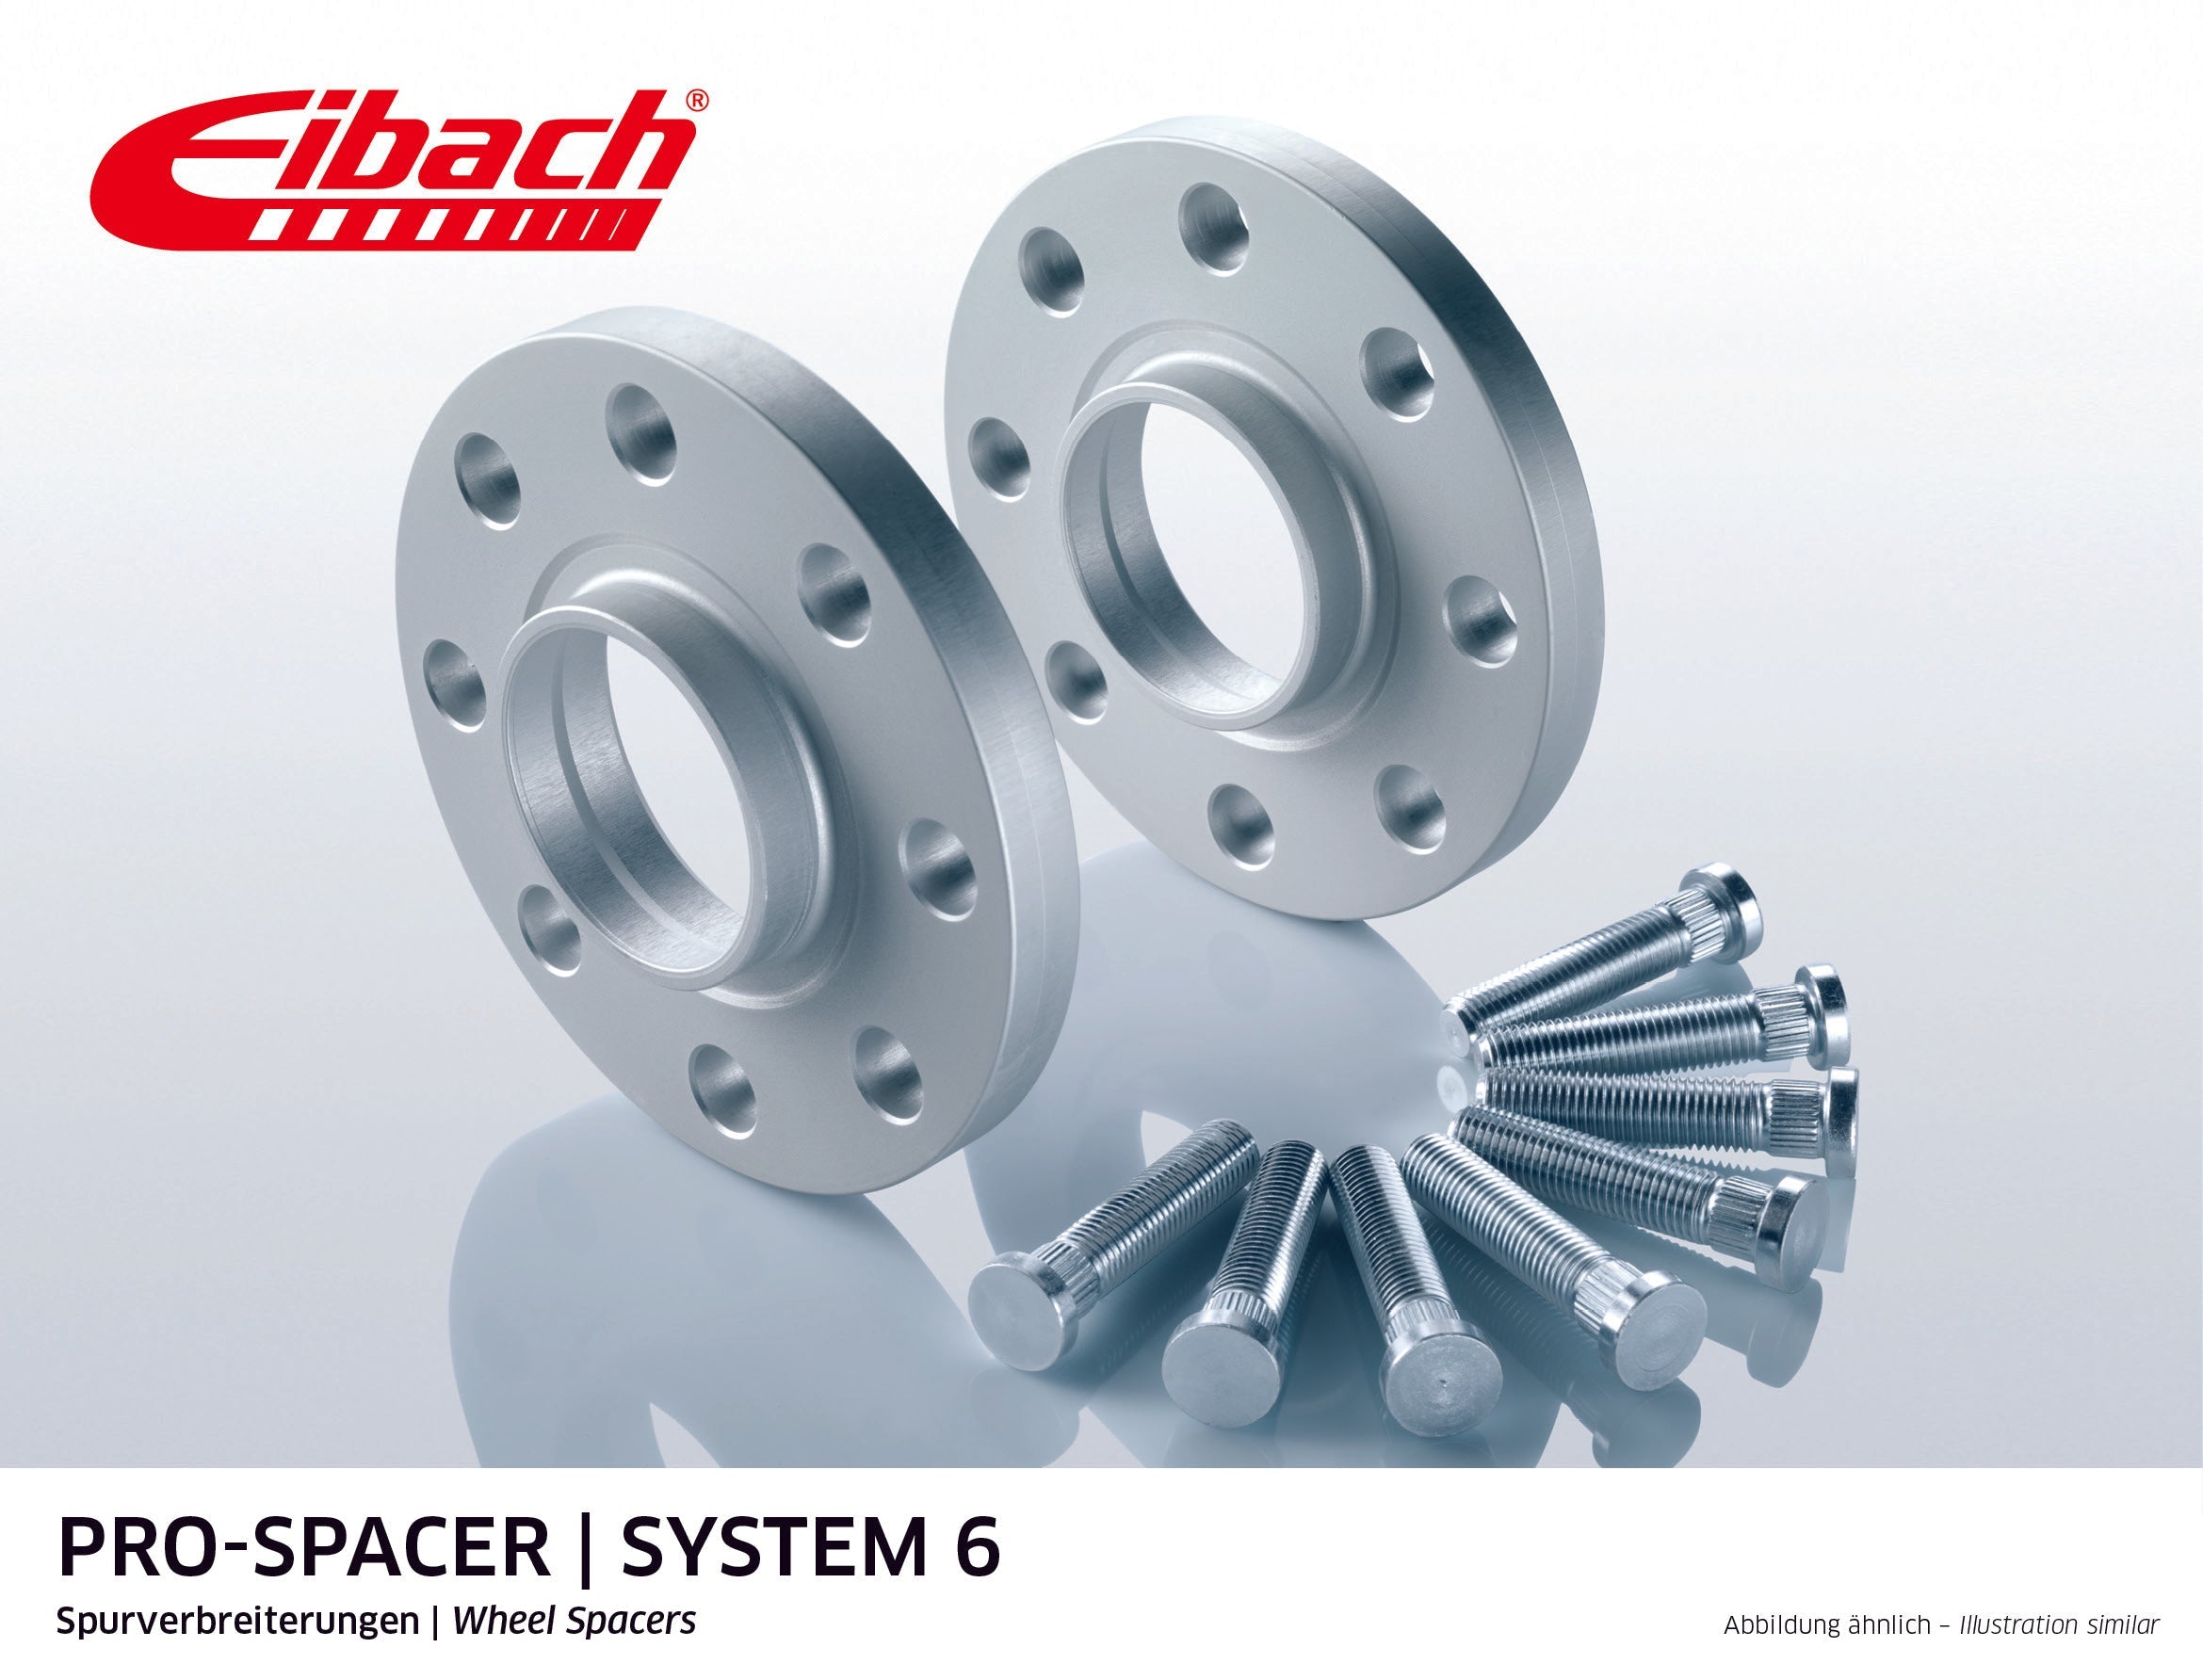 Eibach Pro-Spacer Kit (Pair Of Spacers) 15mm Per Spacer (System 6) S90-6-15-049  (Silver) at £131.68